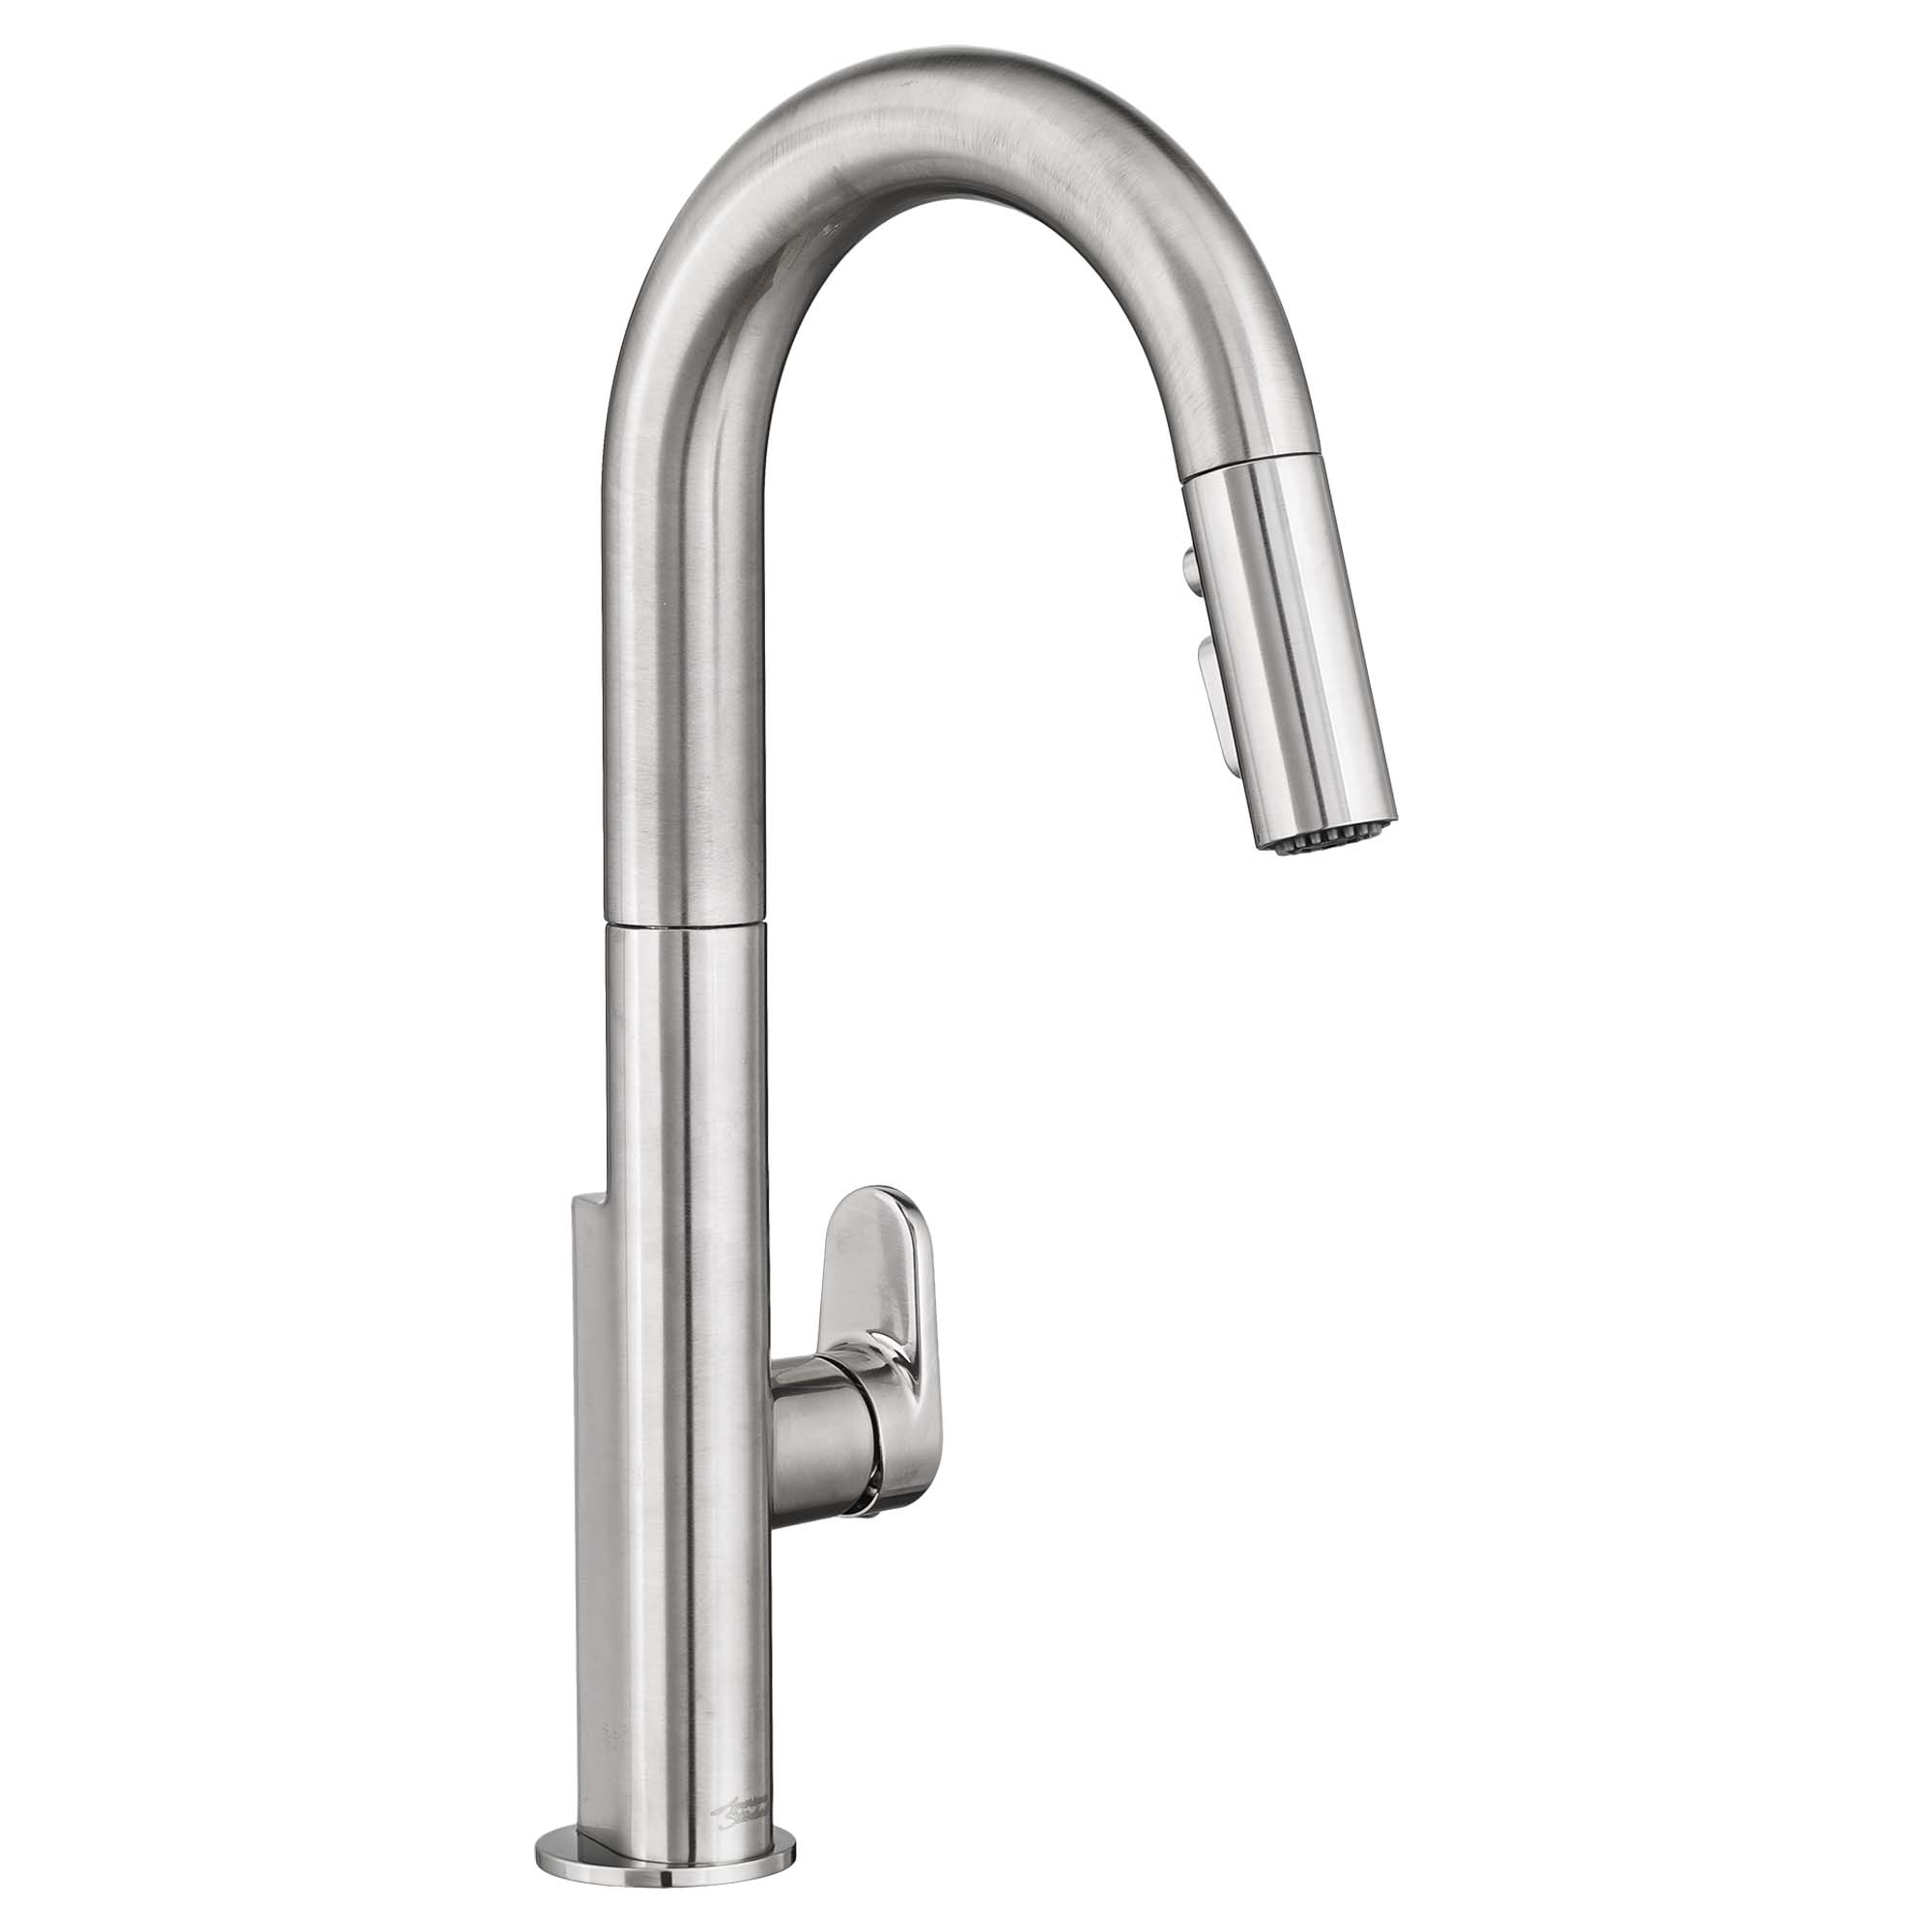 Beale Single Handle Pull-Down Spray Kitchen Faucet in Stainless Steel